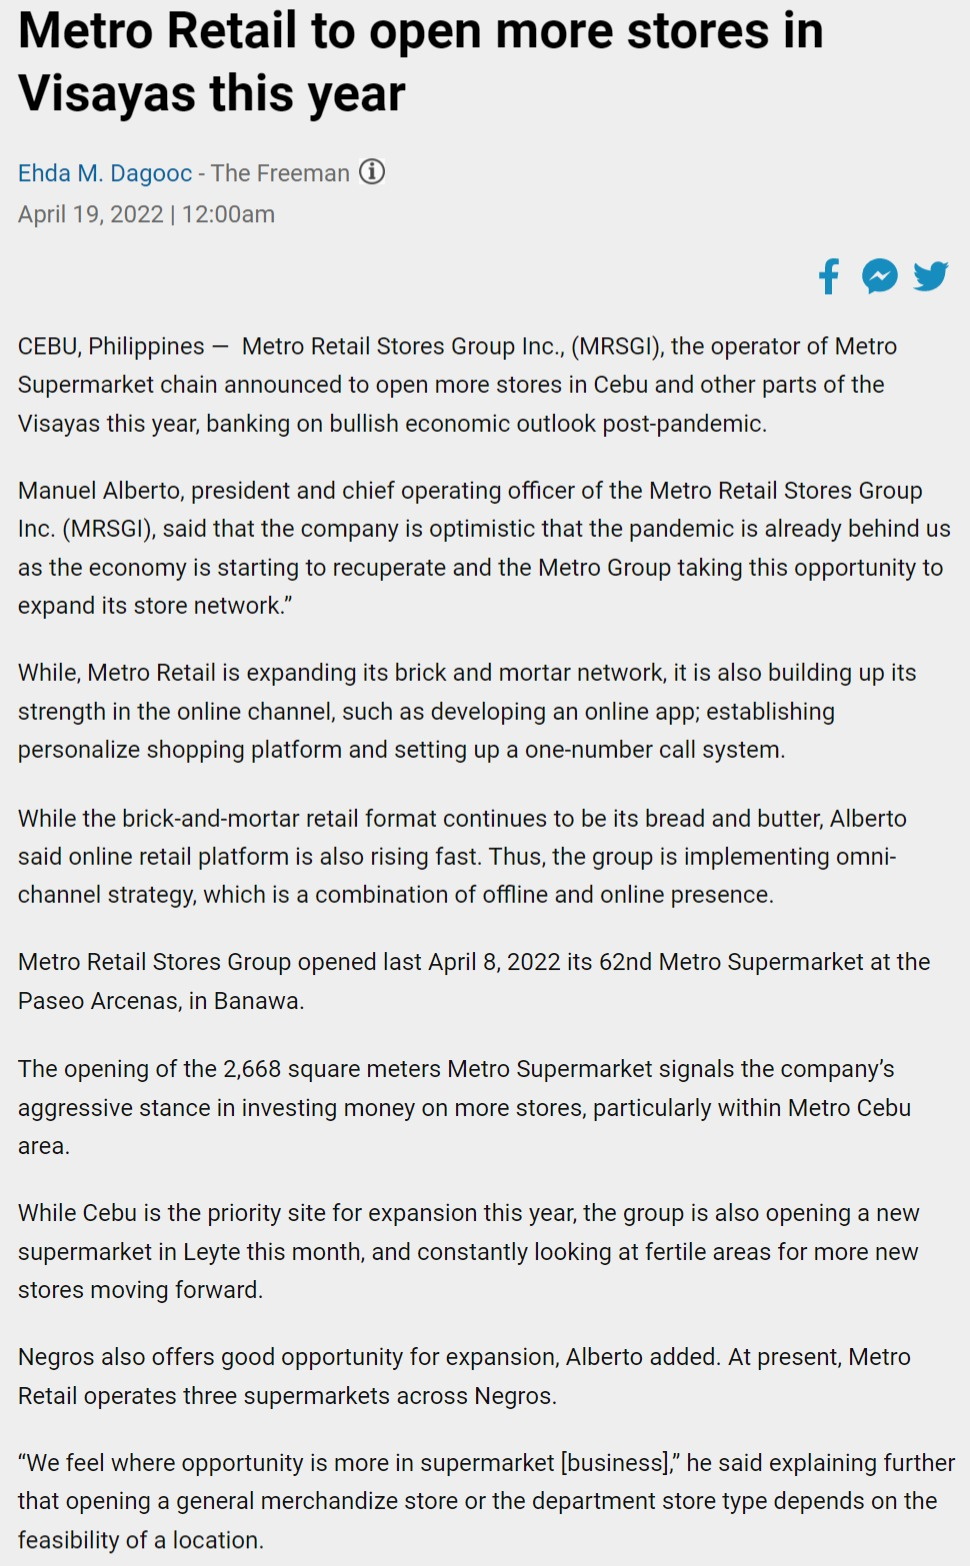 Metro Retail to open more stores in Visayas this year The Freeman